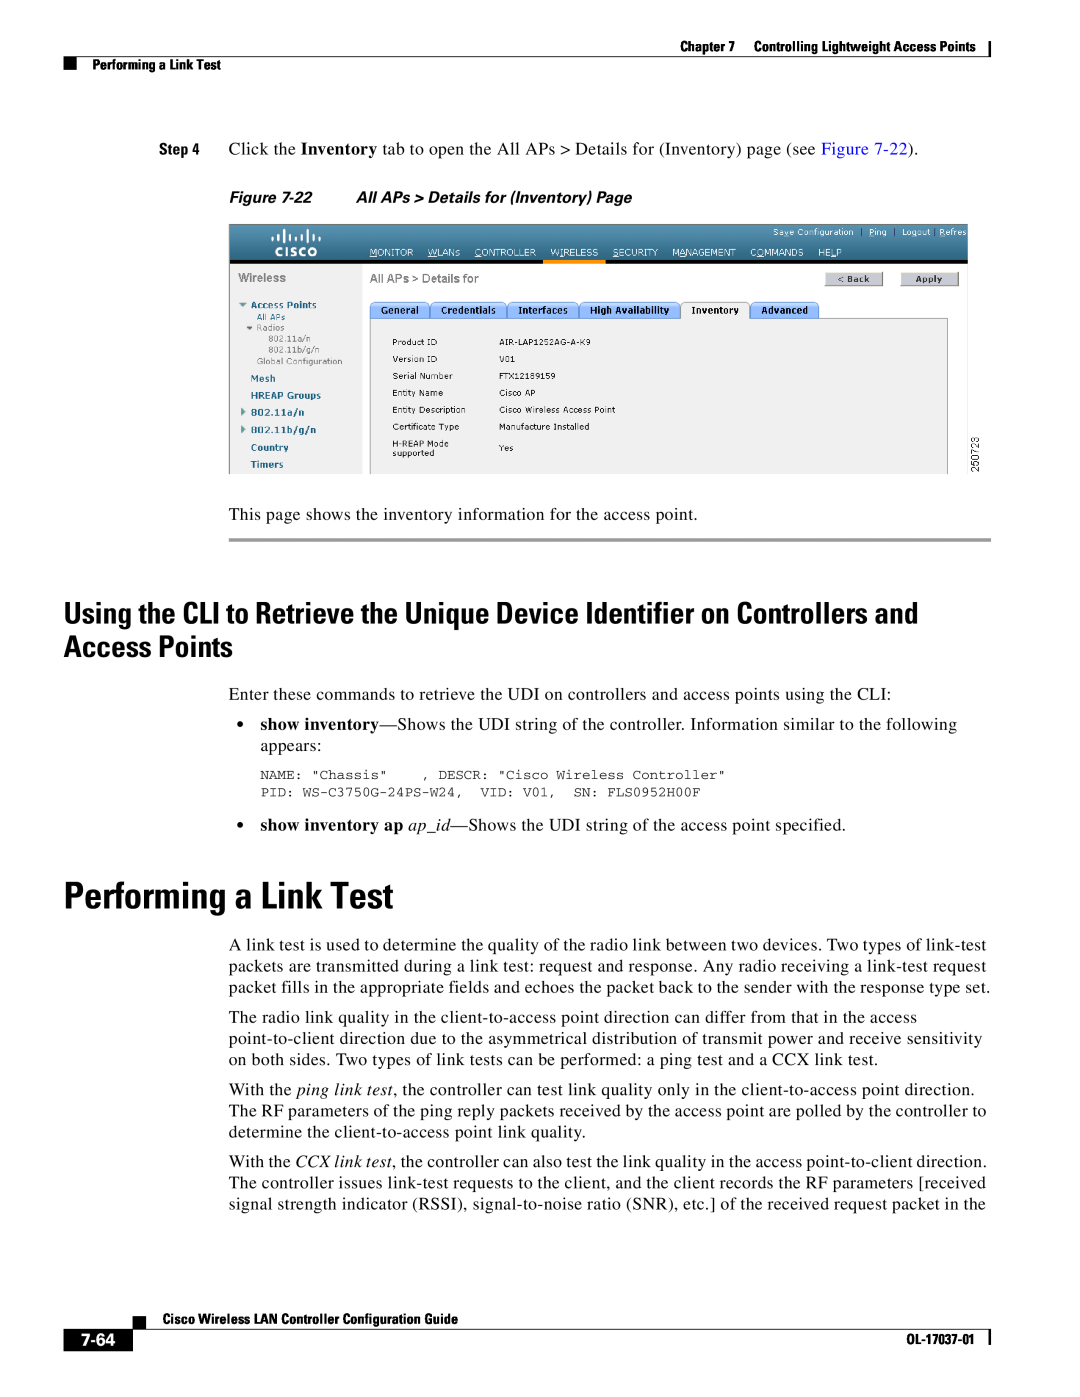 Cisco Systems OL-17037-01 manual Performing a Link Test, 7-64 